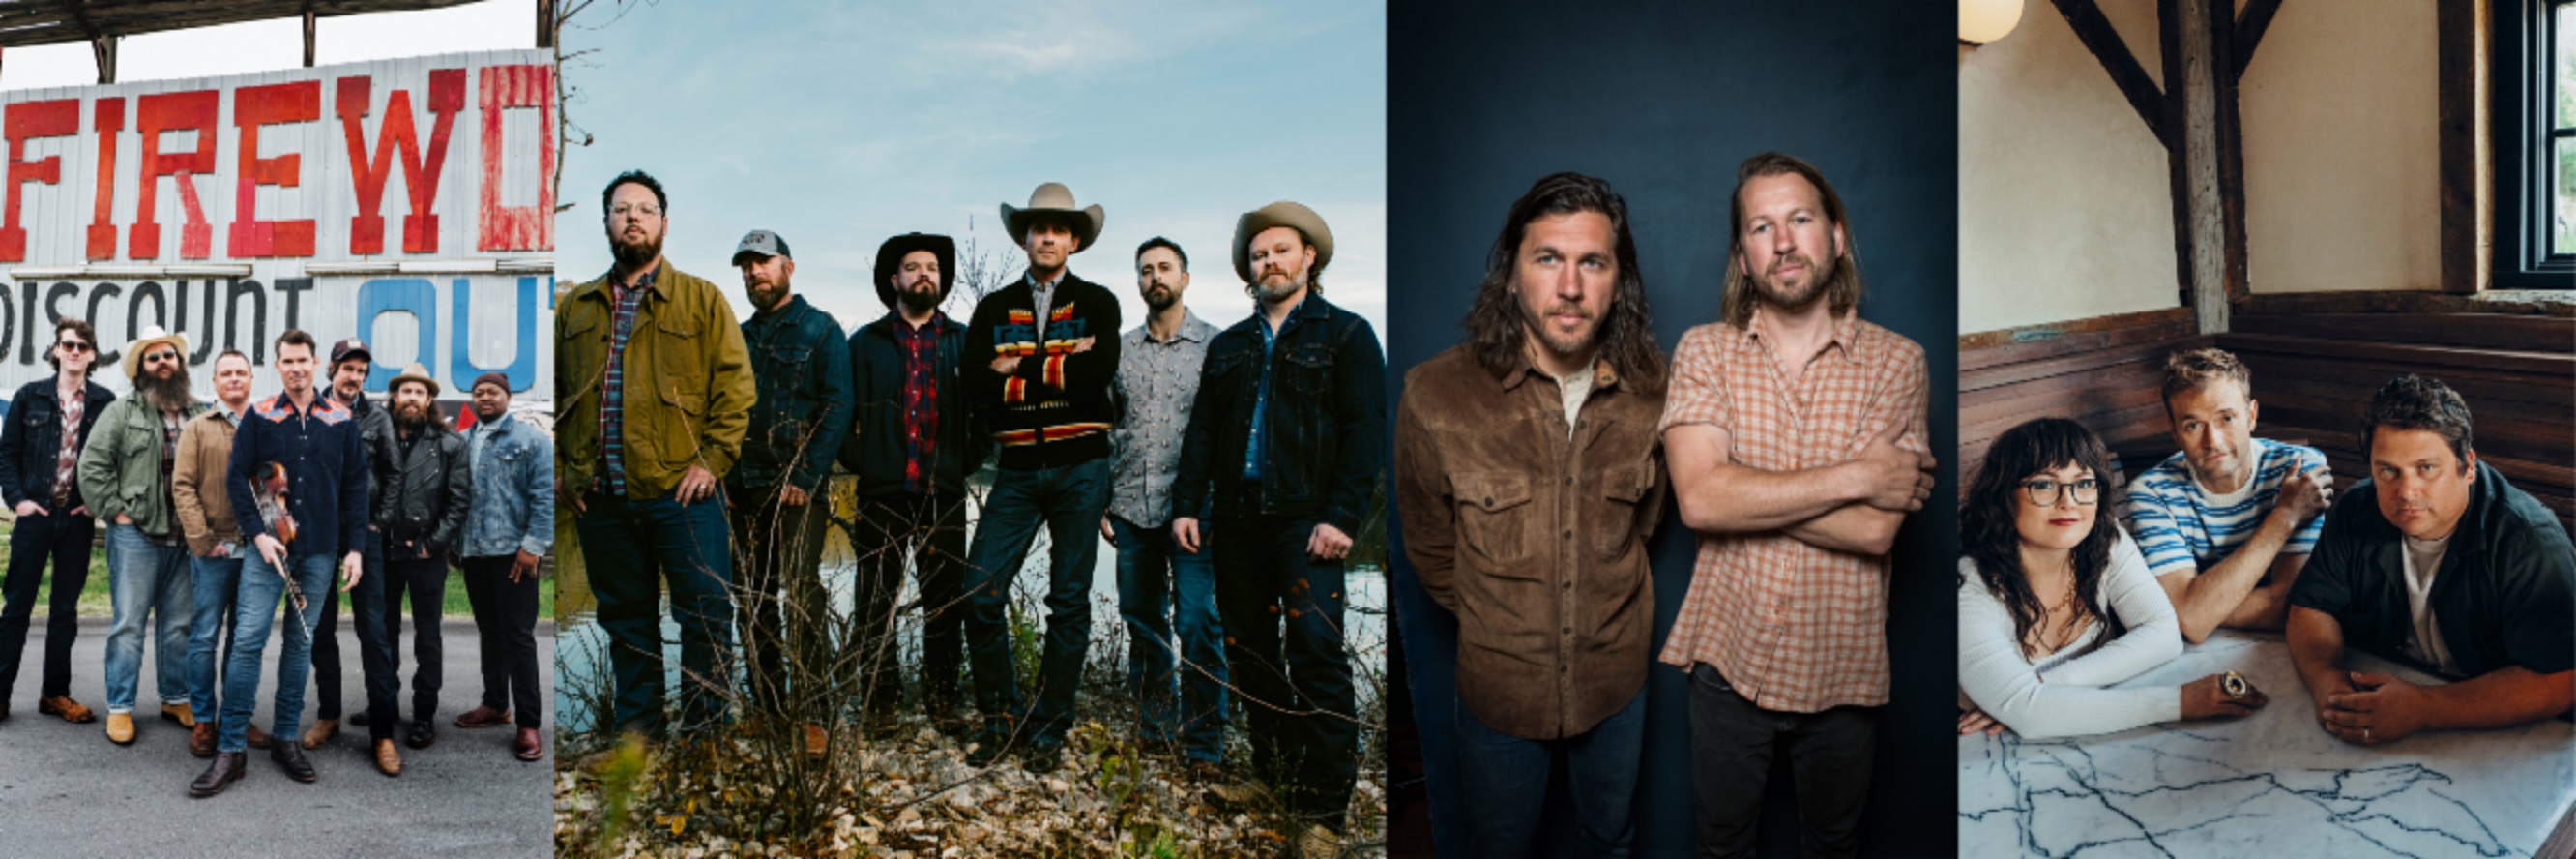 MerleFest Announces Initial 2024 Lineup – Old Crow Medicine Show, Turnpike Troubadours, The Teskey Brothers, Nickel Creek, and More